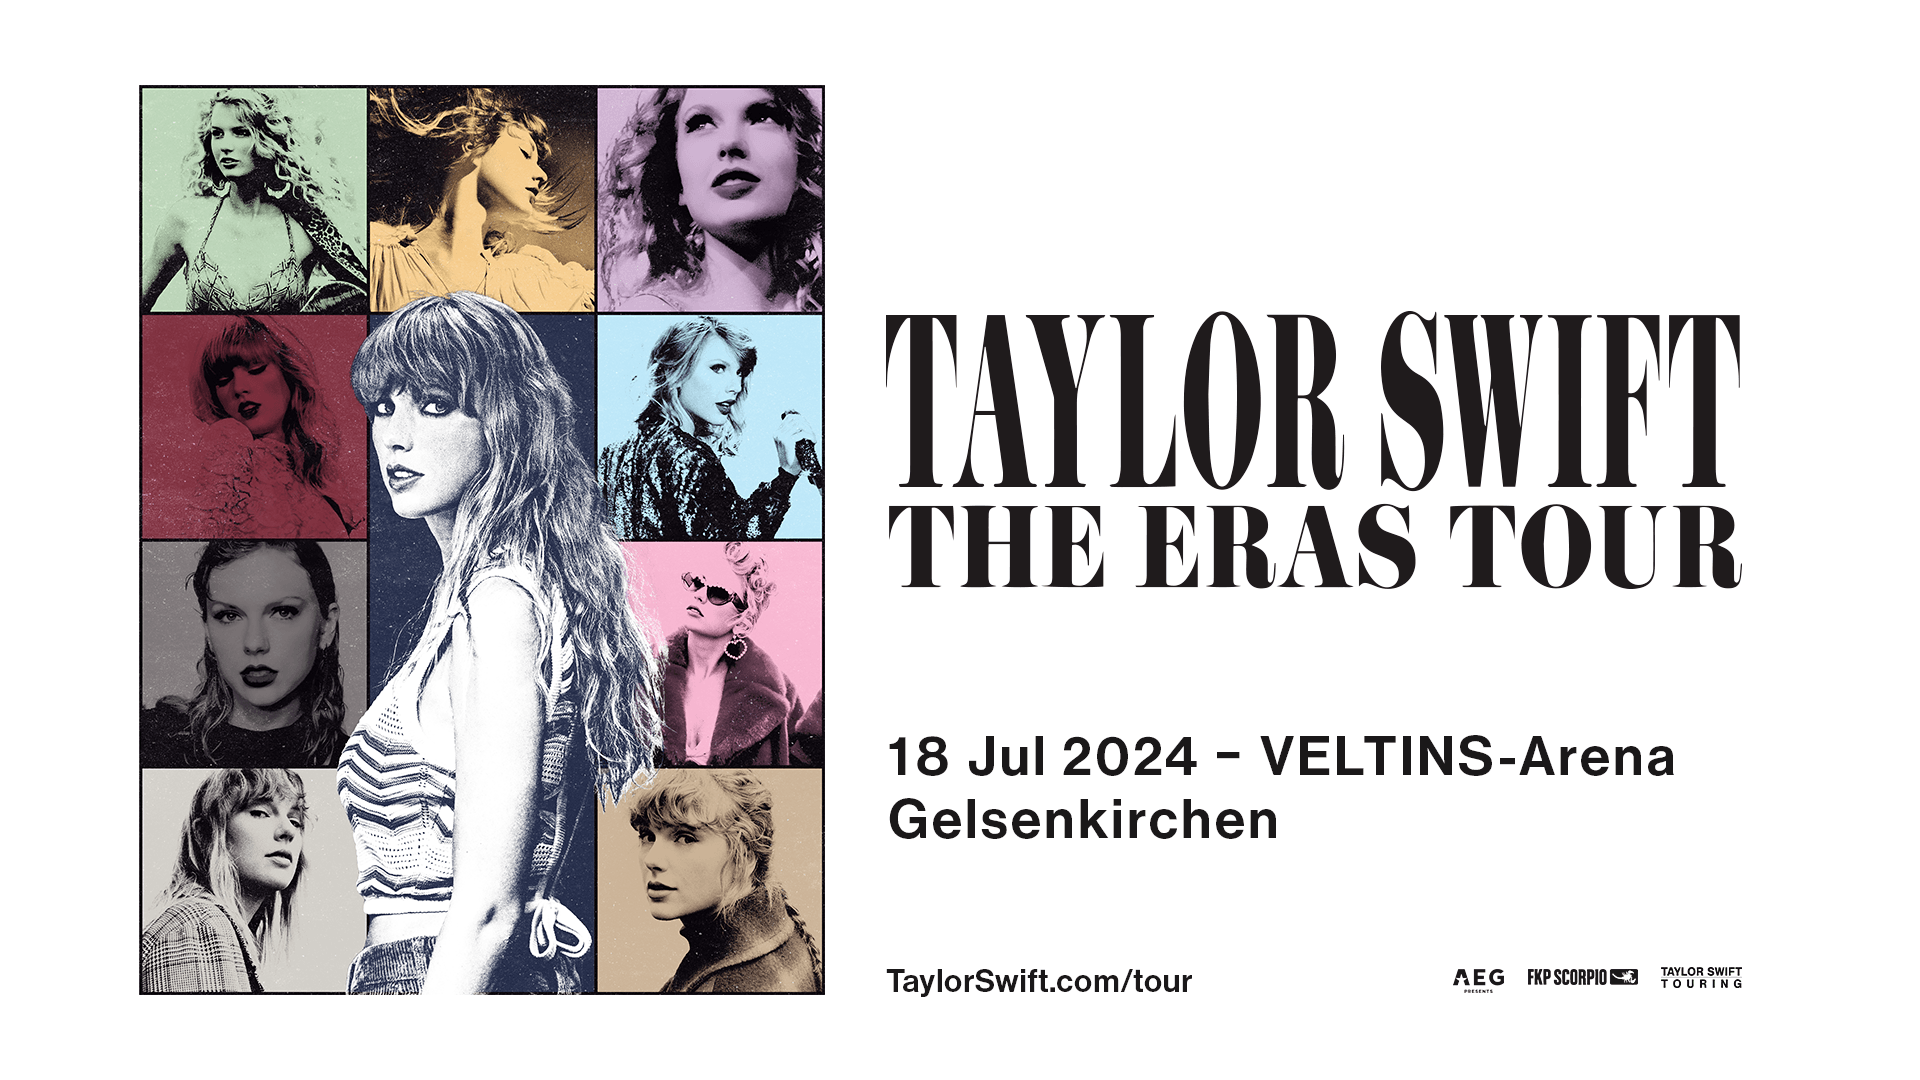 Taylor Swift Tickets In 2024 Image to u